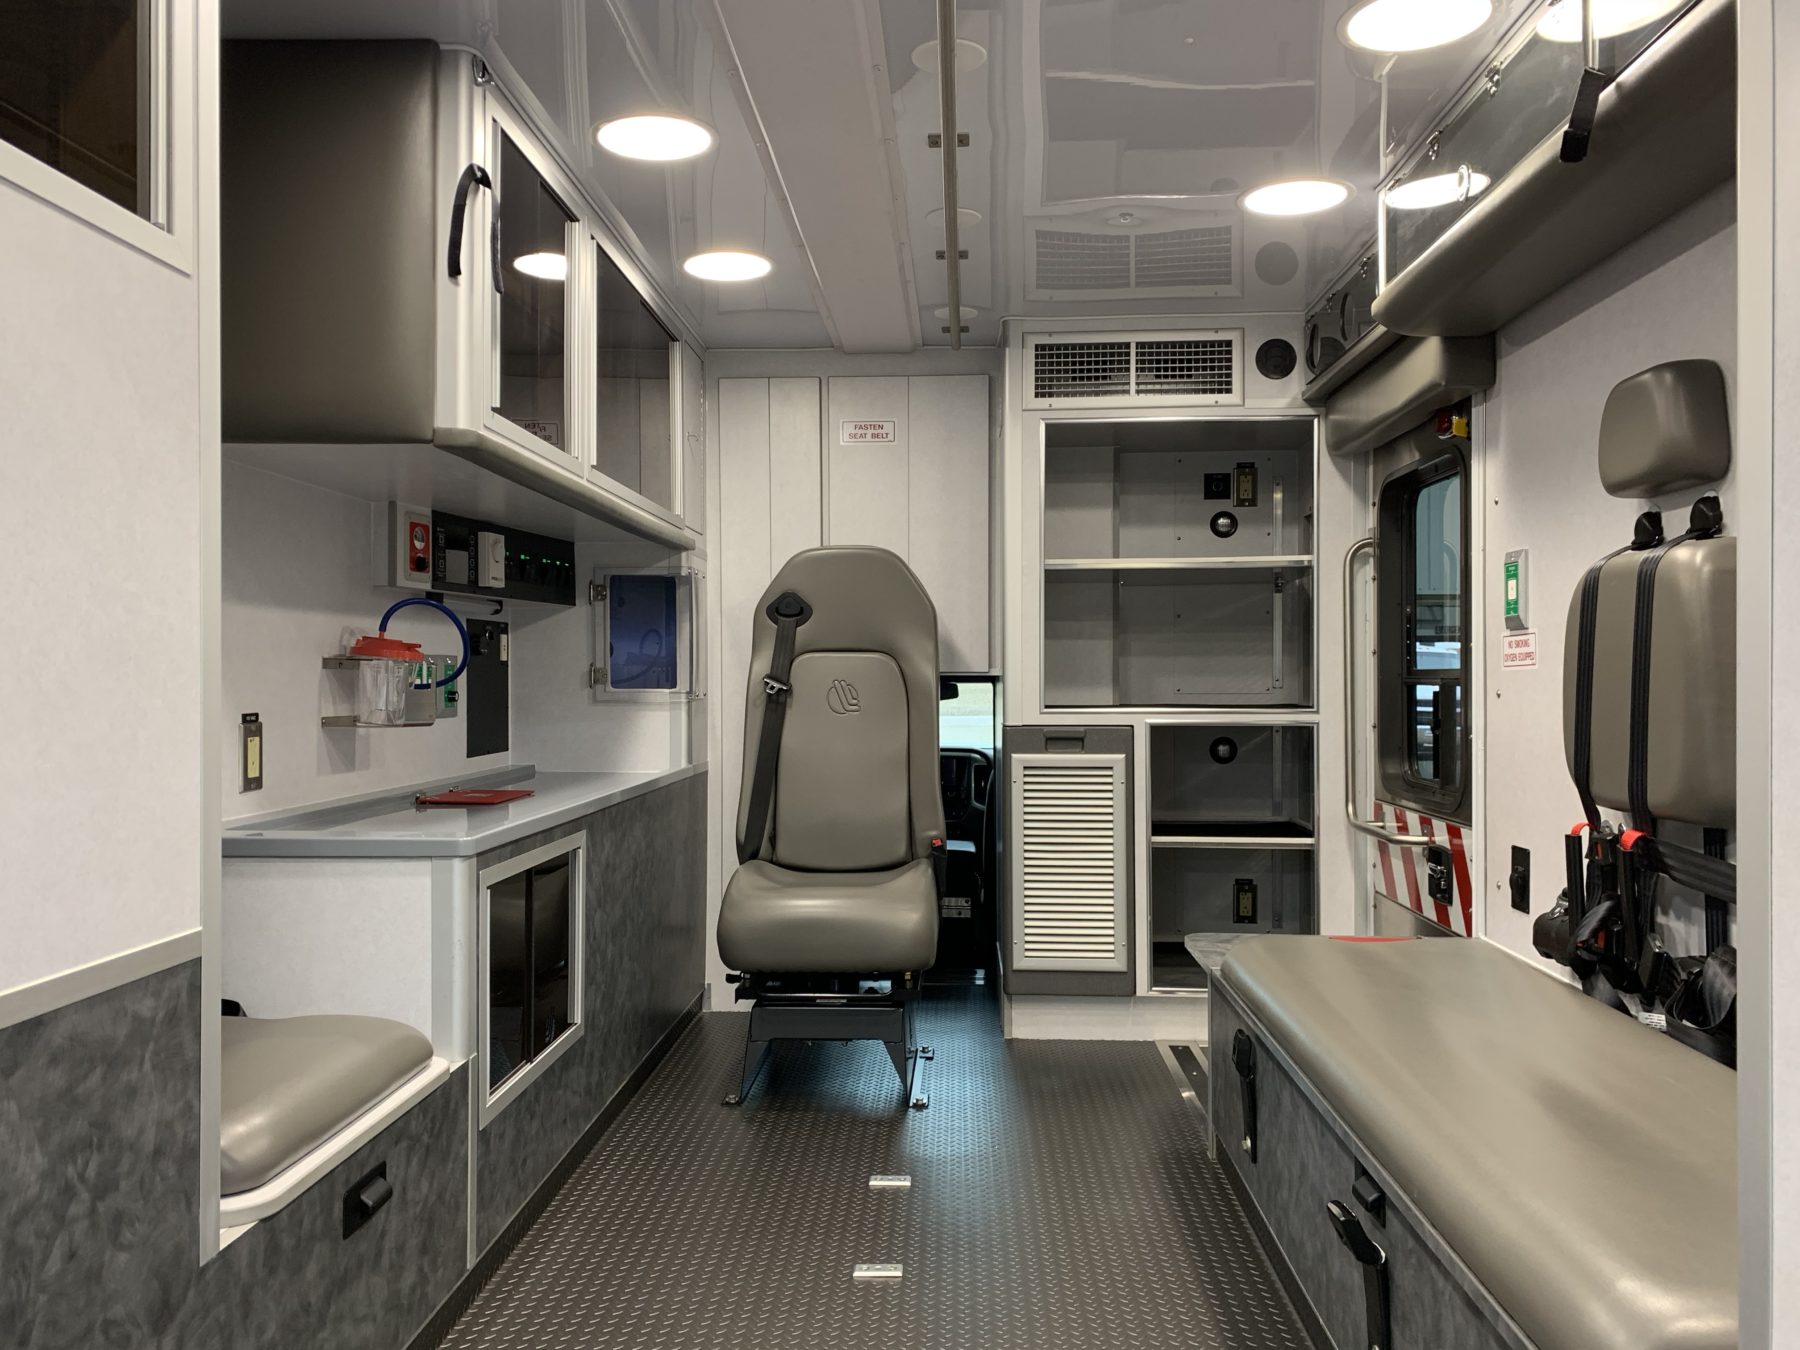 2019 Chevrolet K3500 4x4 Type 1 Ambulance For Sale – Picture 3